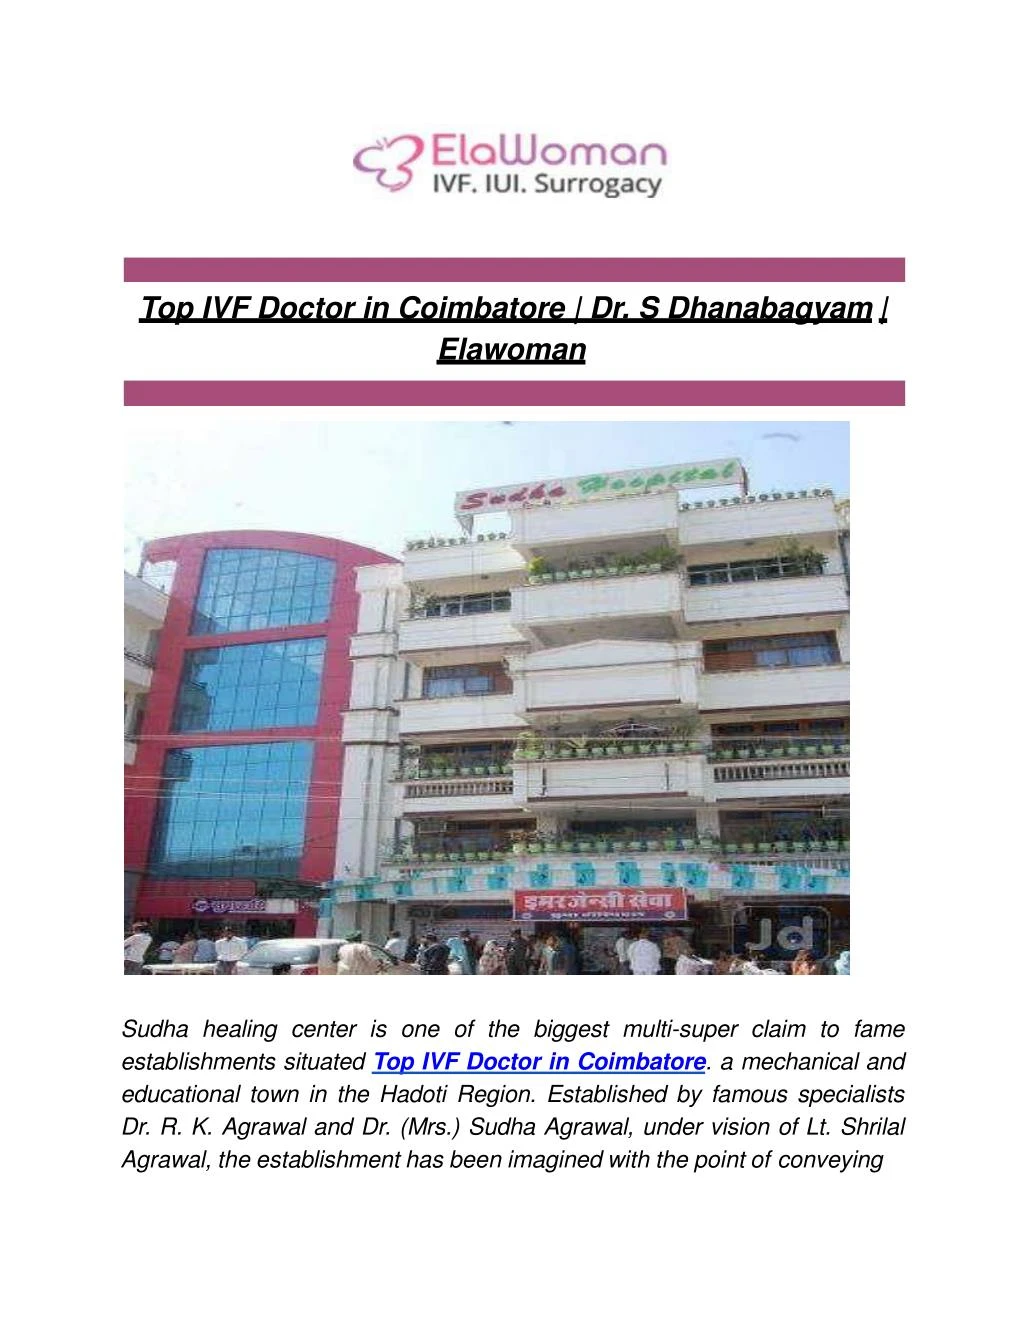 top ivf doctor in coimbatore dr s dhanabagyam